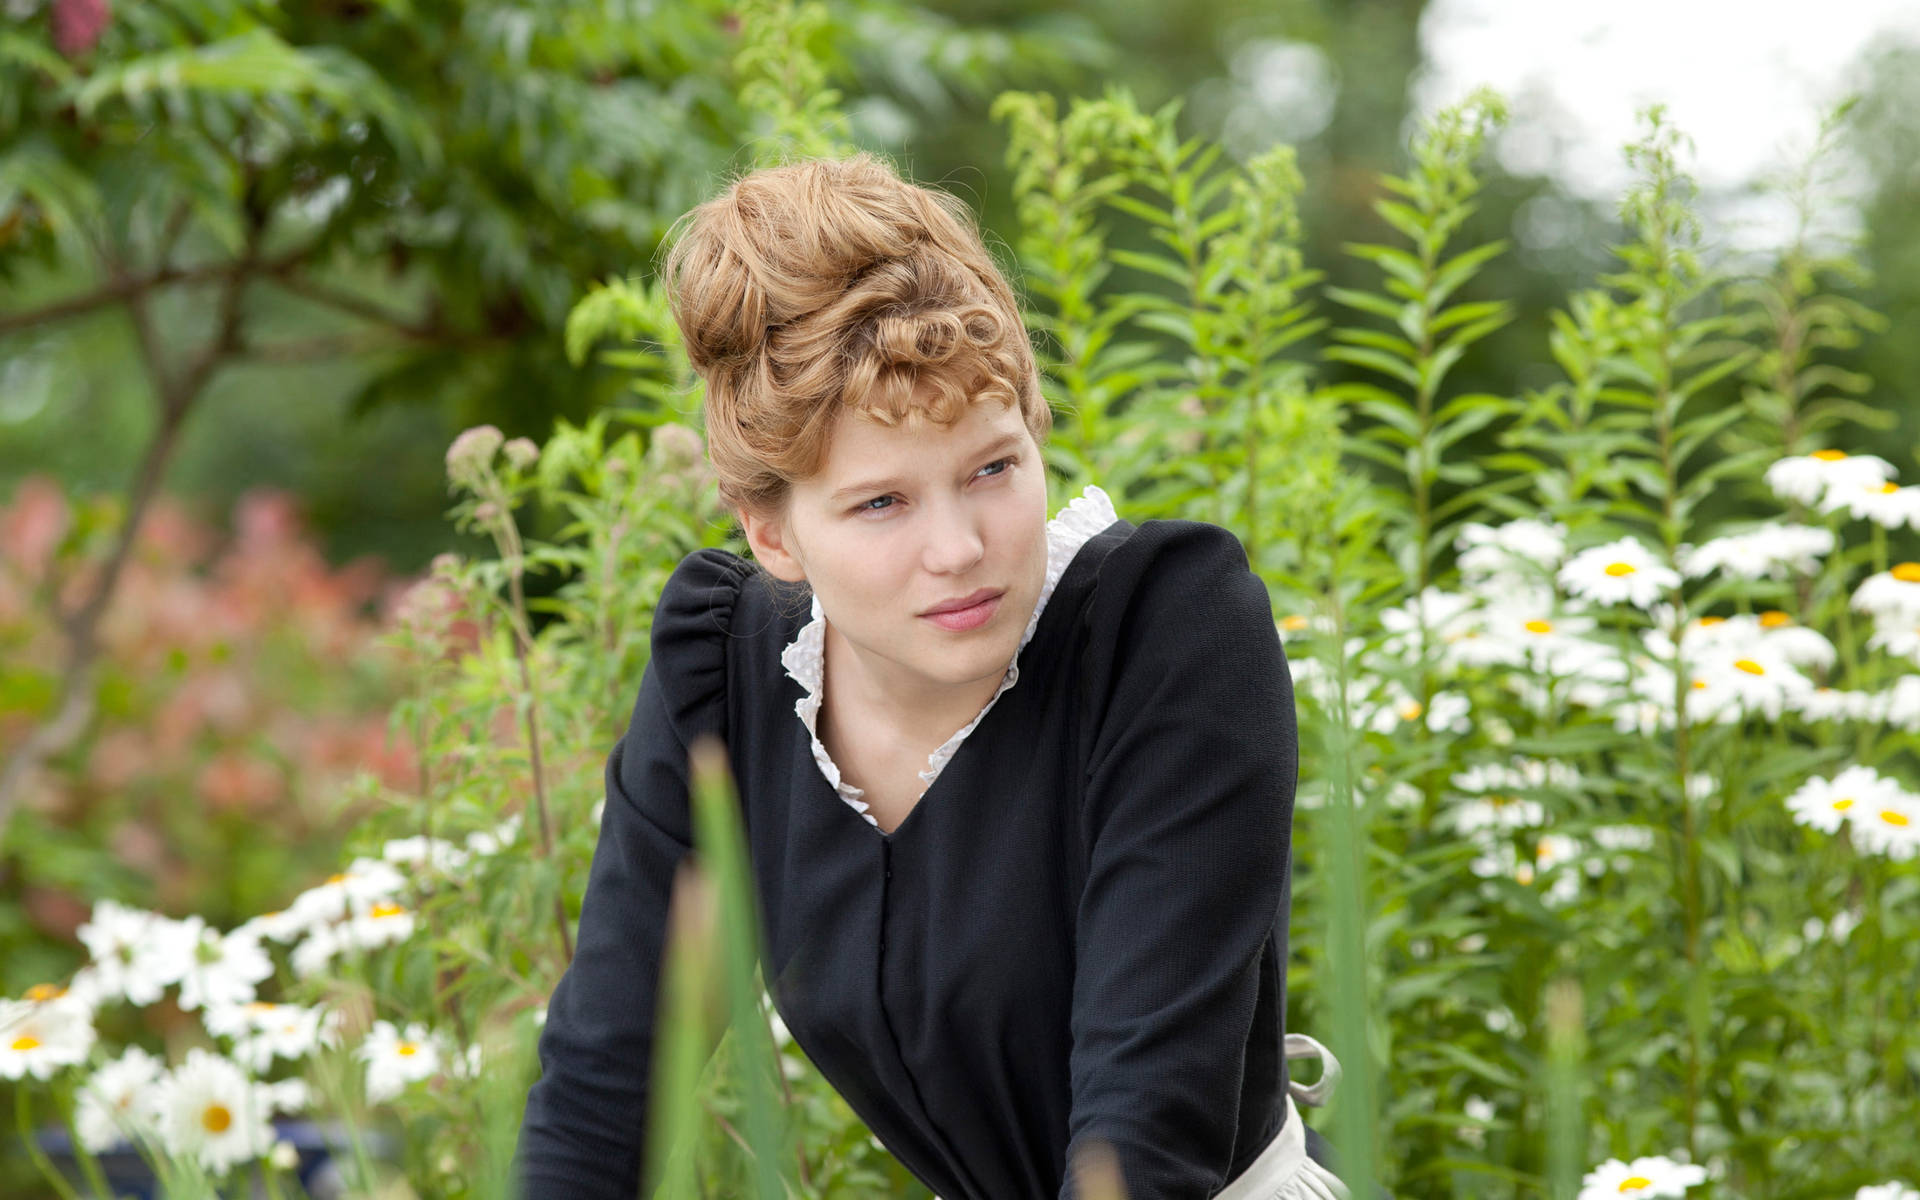 Lea Seydoux Diary Of A Chambermaid Background